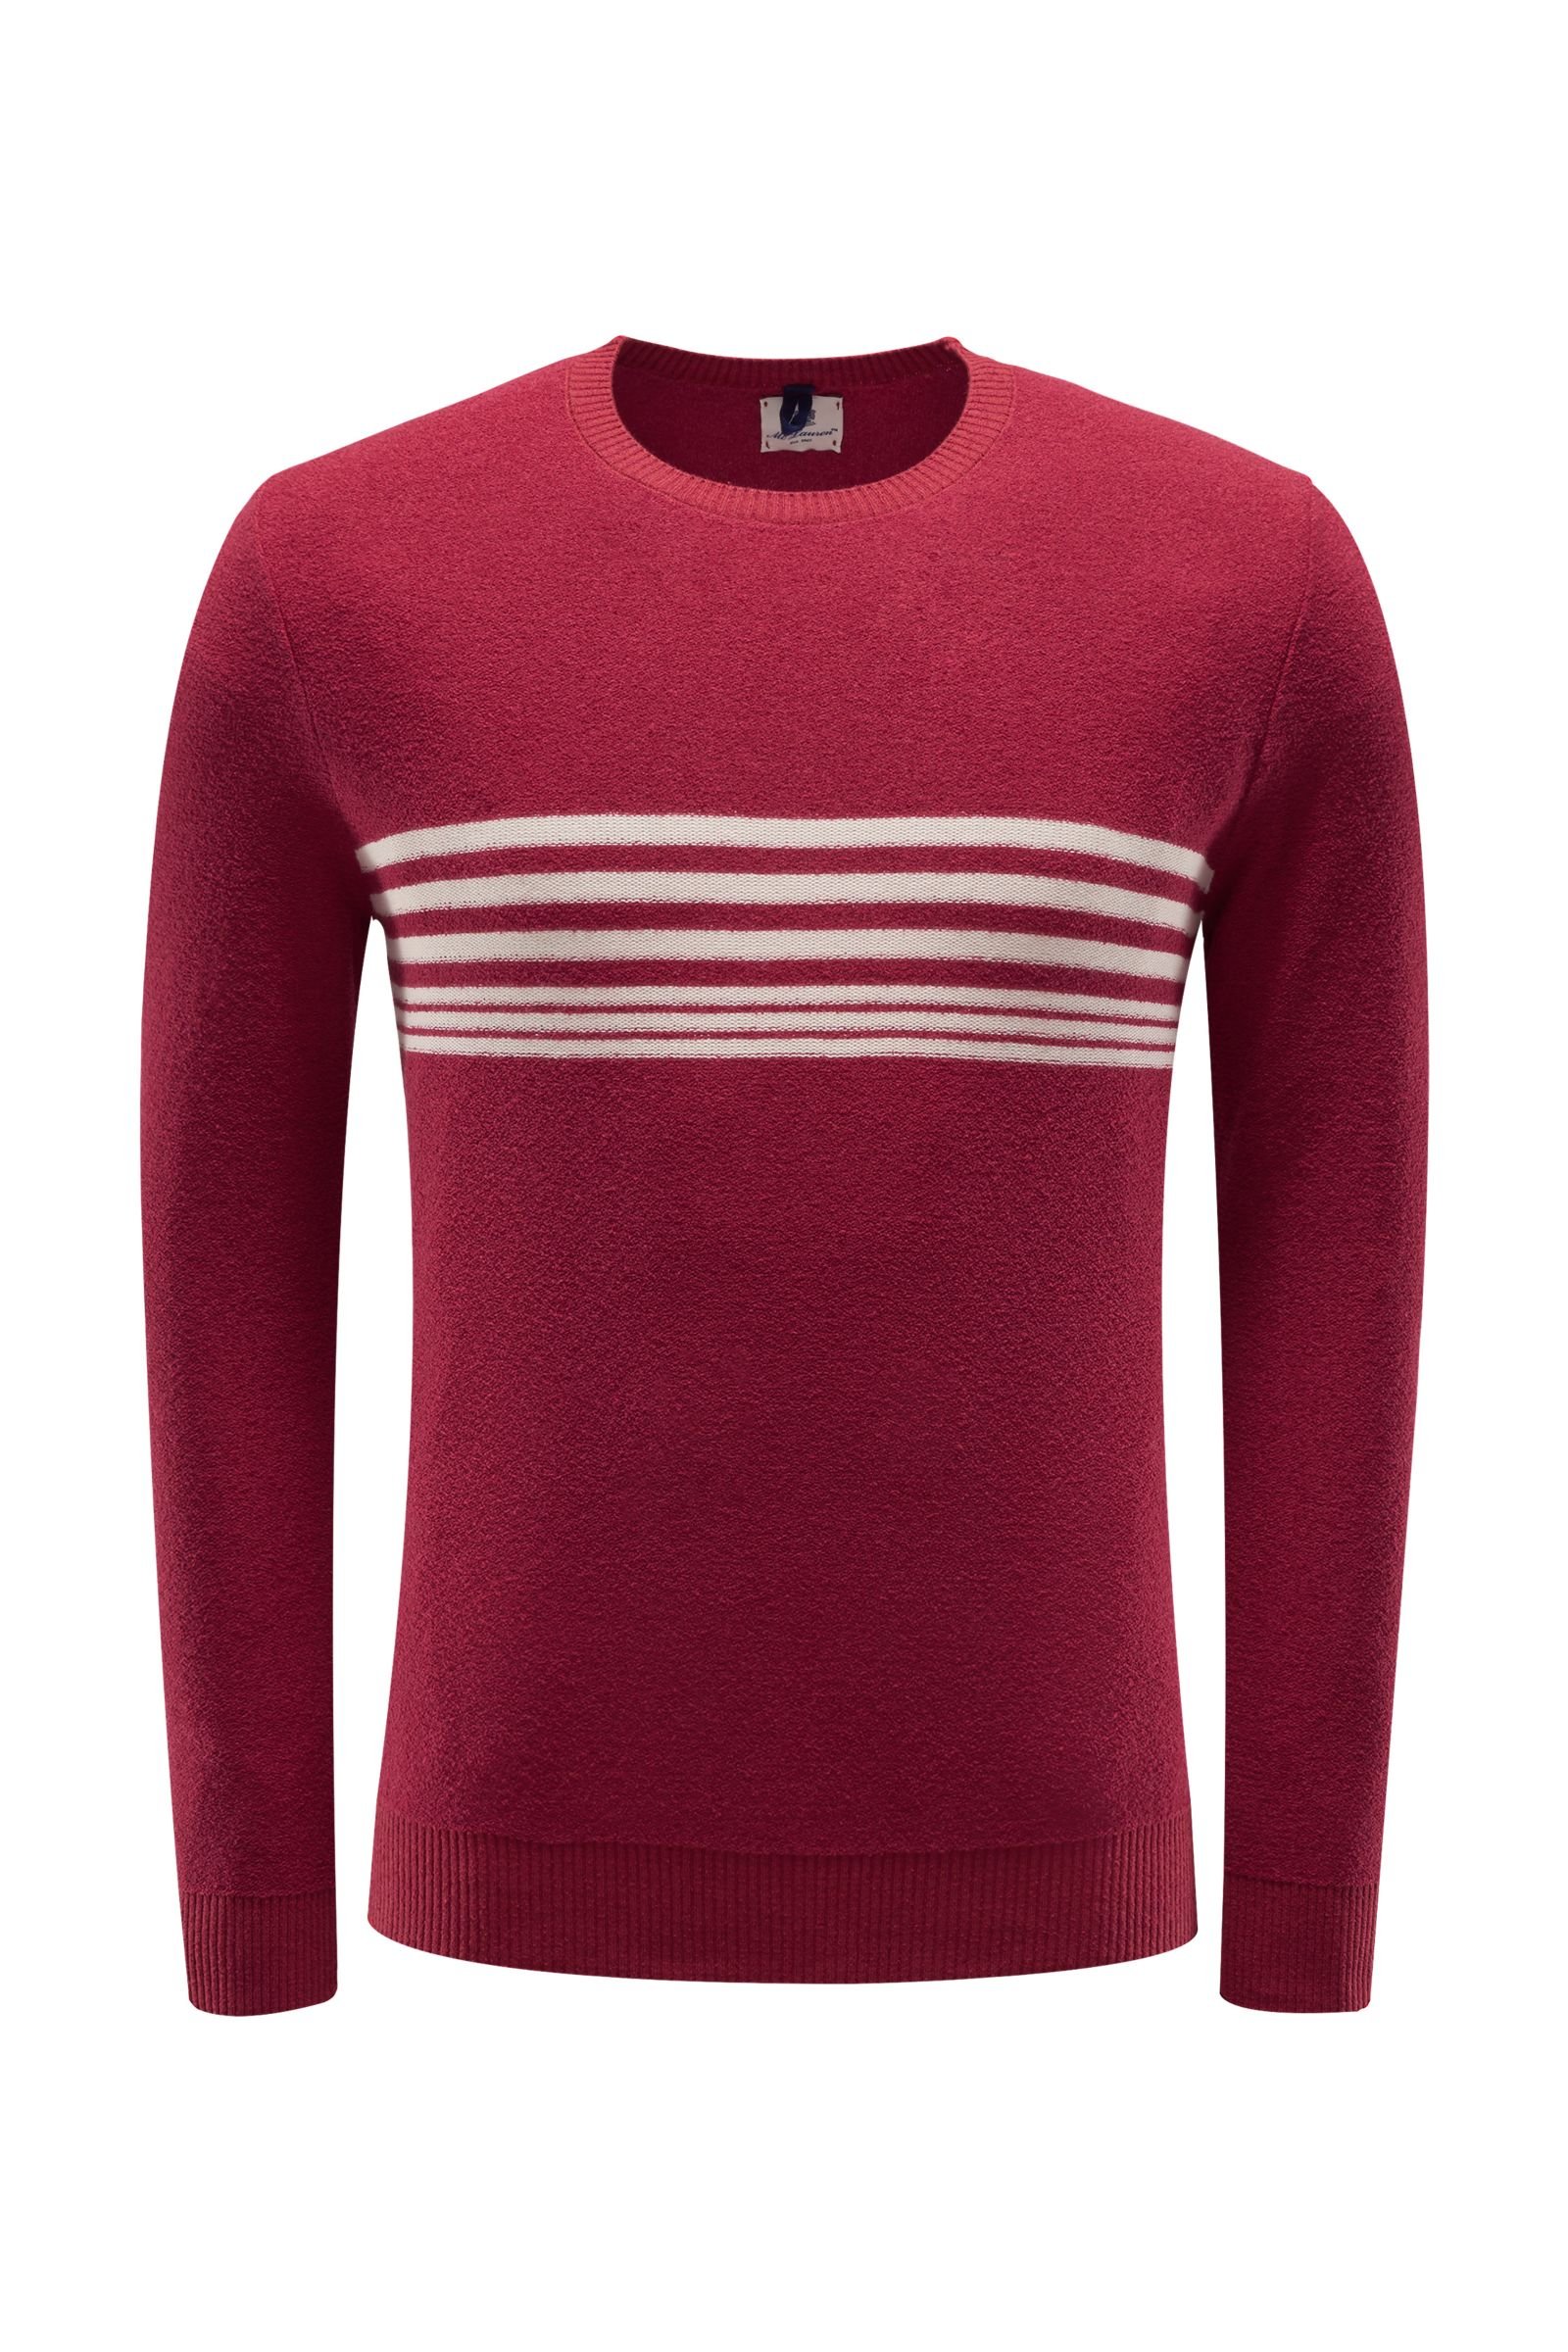 Frottee R-Neck Pullover rot/weiß